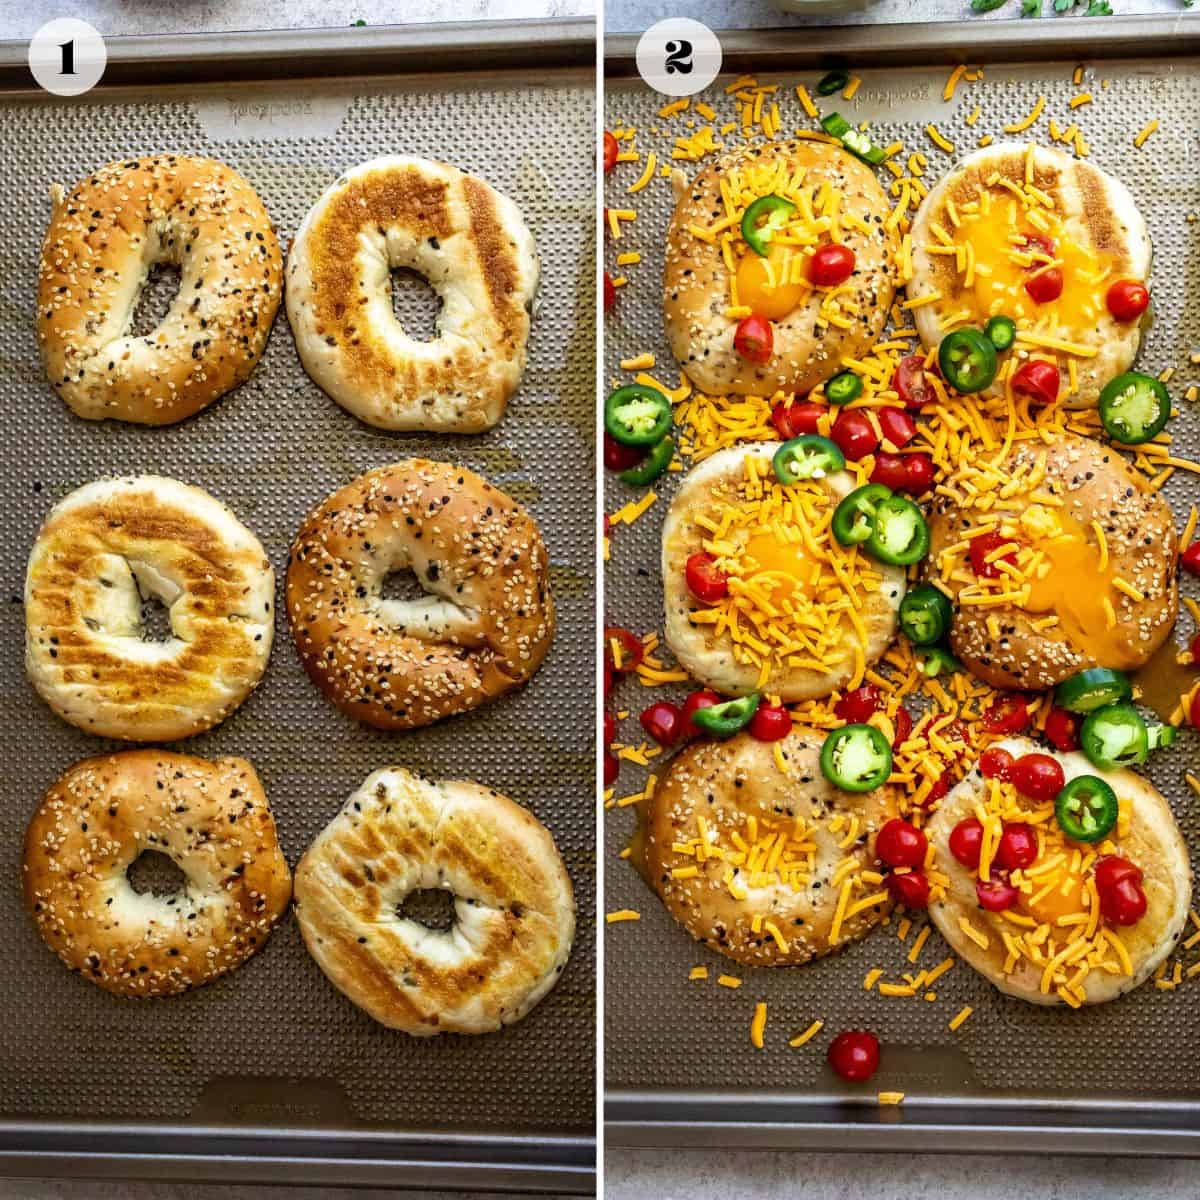 Baking sheet with bagels on it.